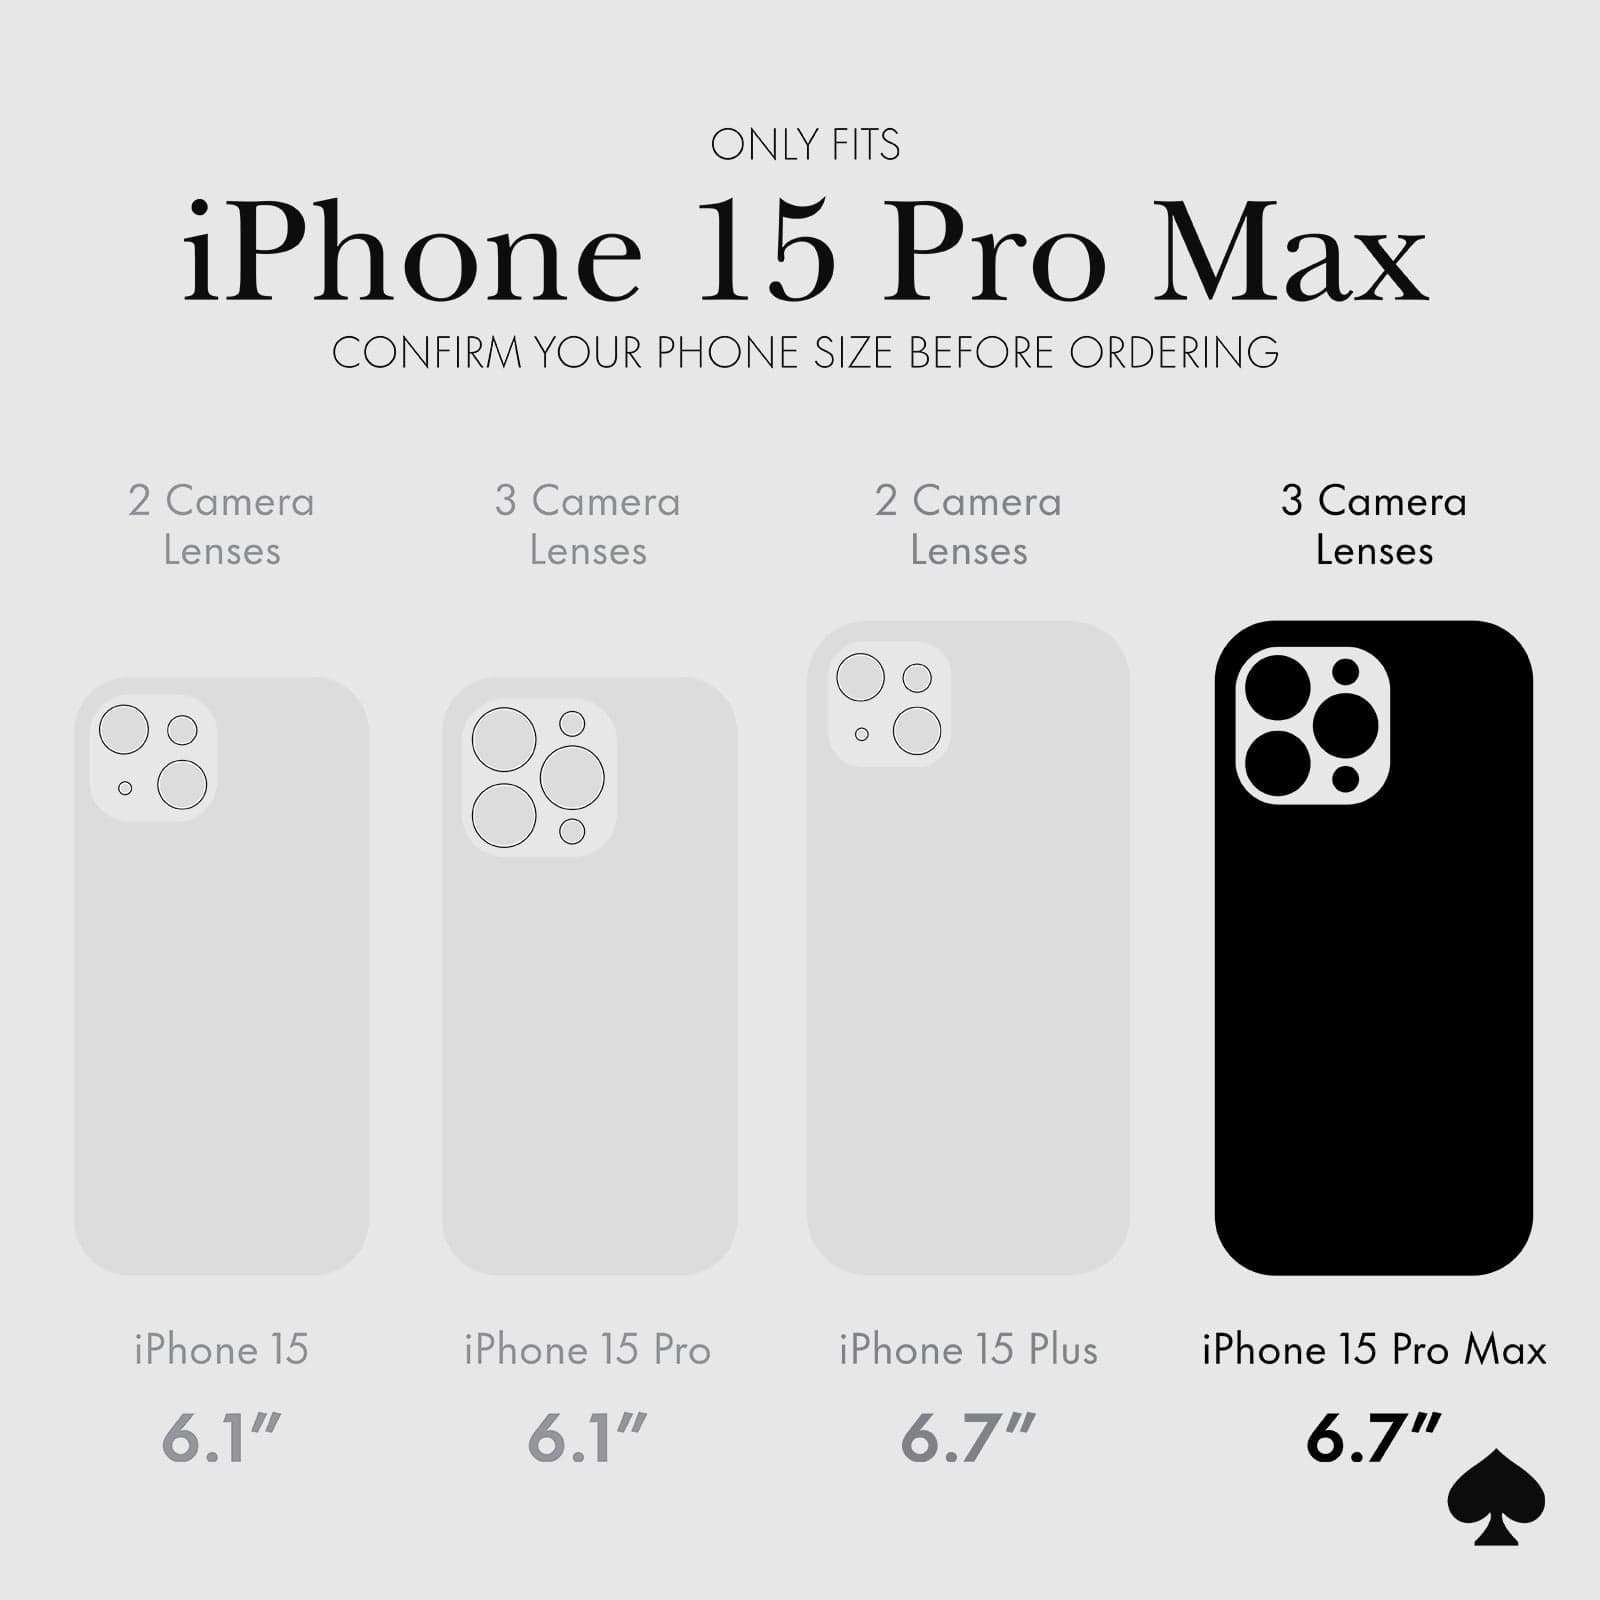 ONLY FITS IPHONE 15 PRO MAX. CONFIRM YOUR PHONE SIZE BEFORE ORDERIGN